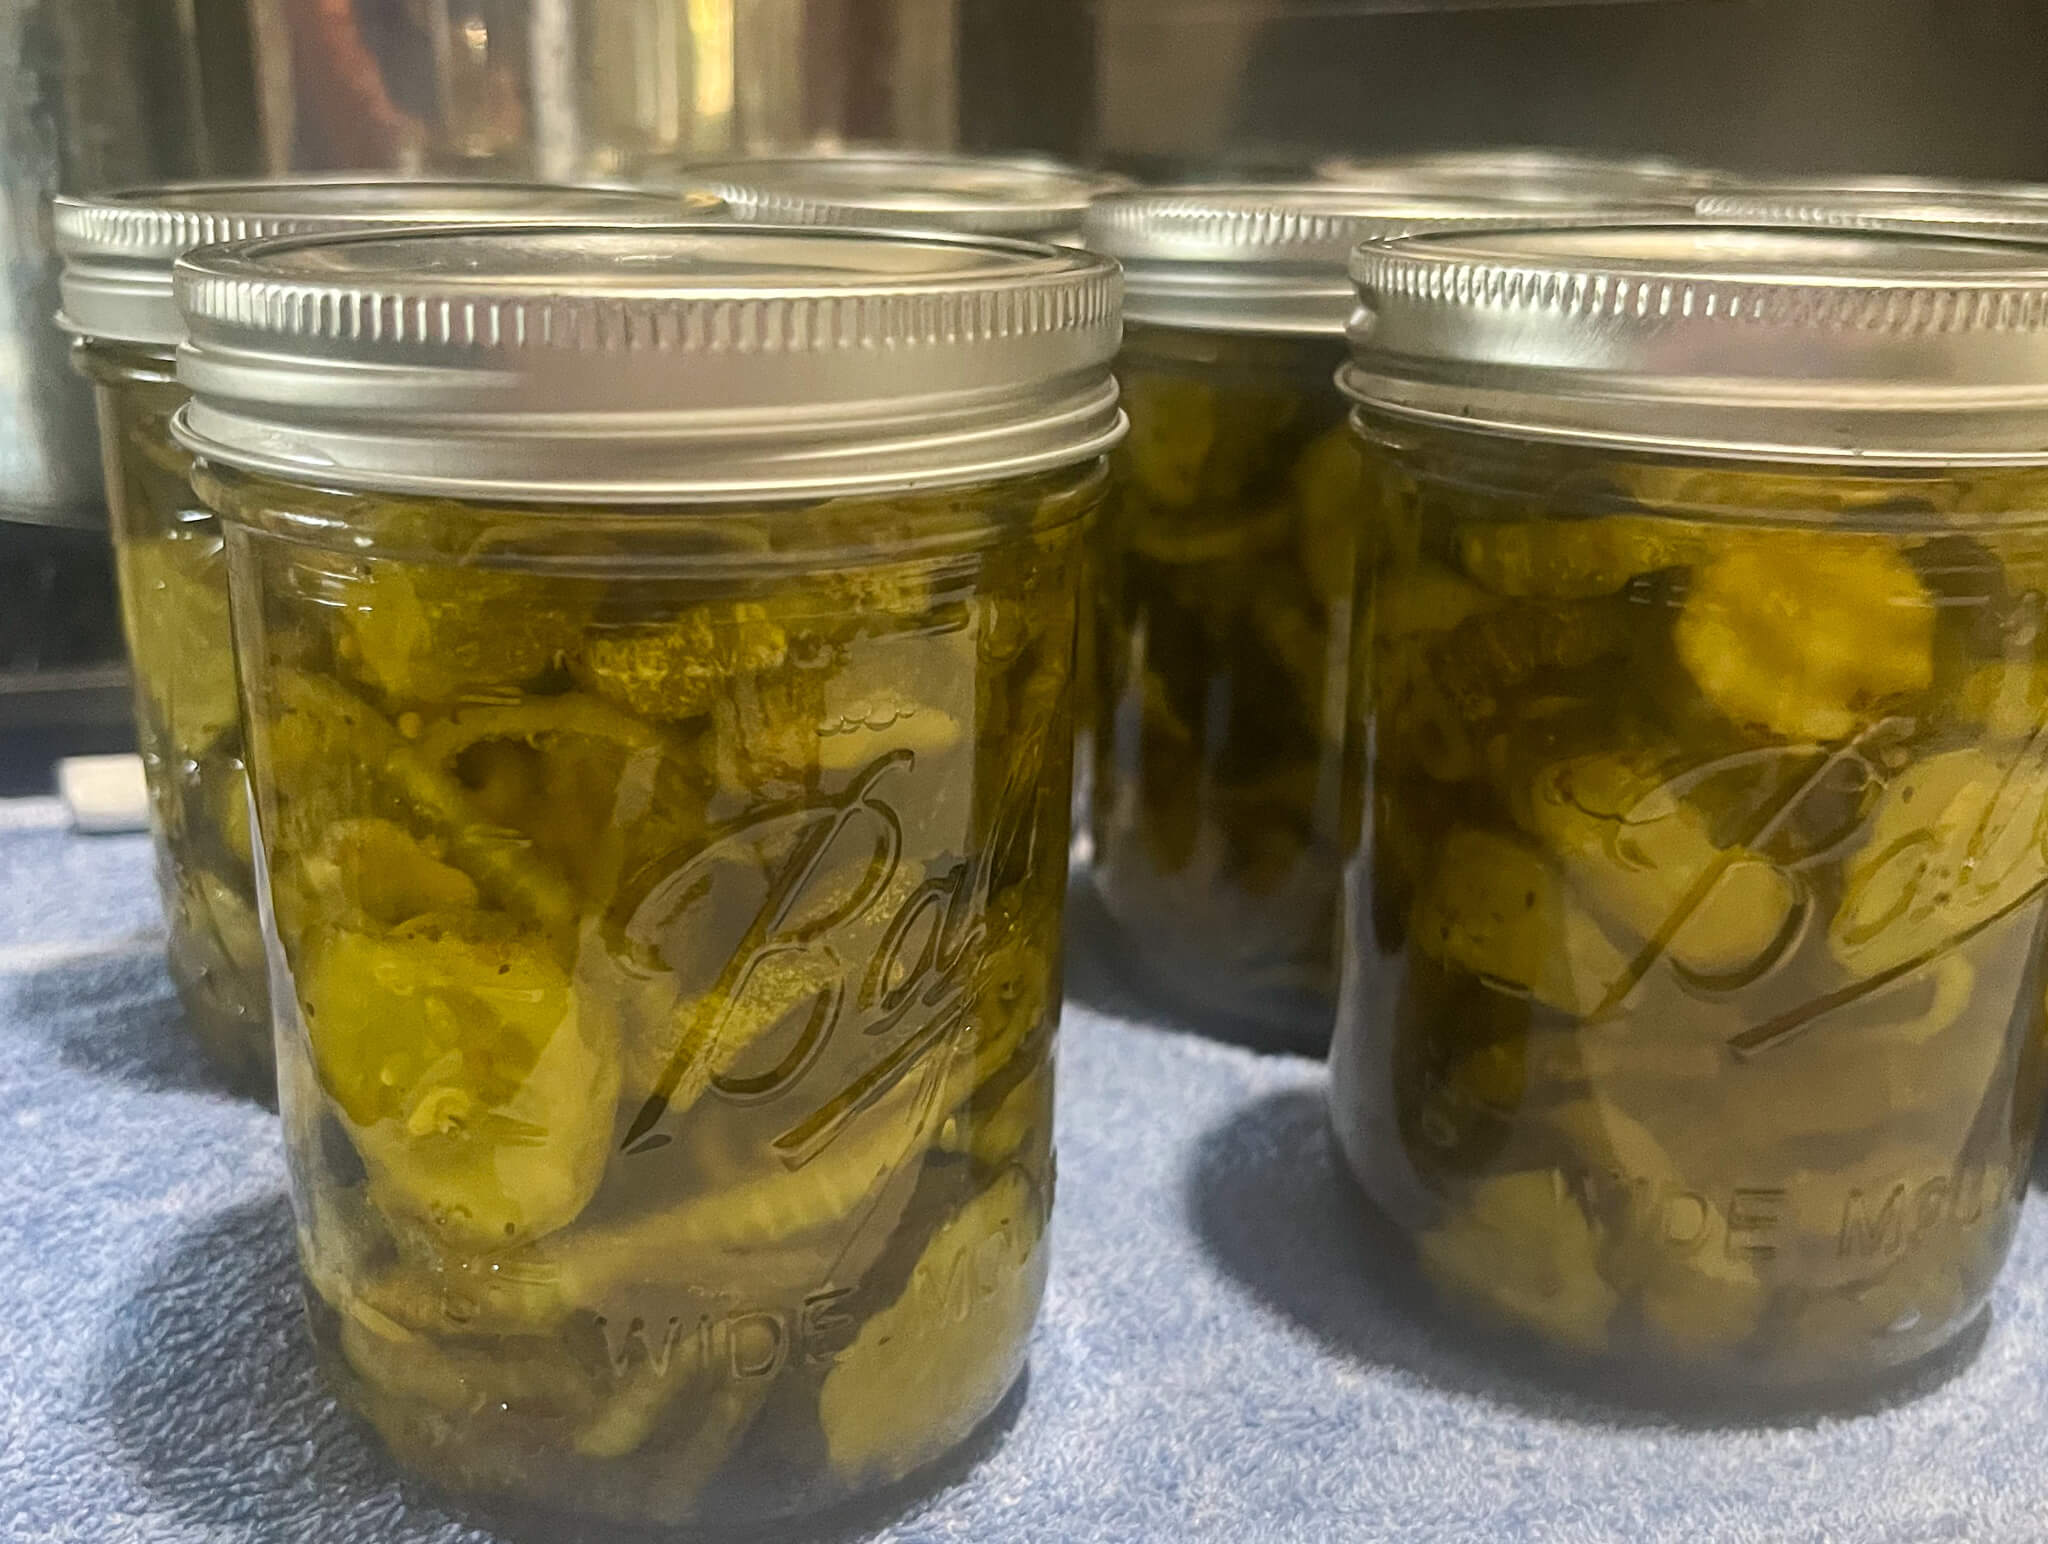 Bread & butter pickles canned and in mason jars.